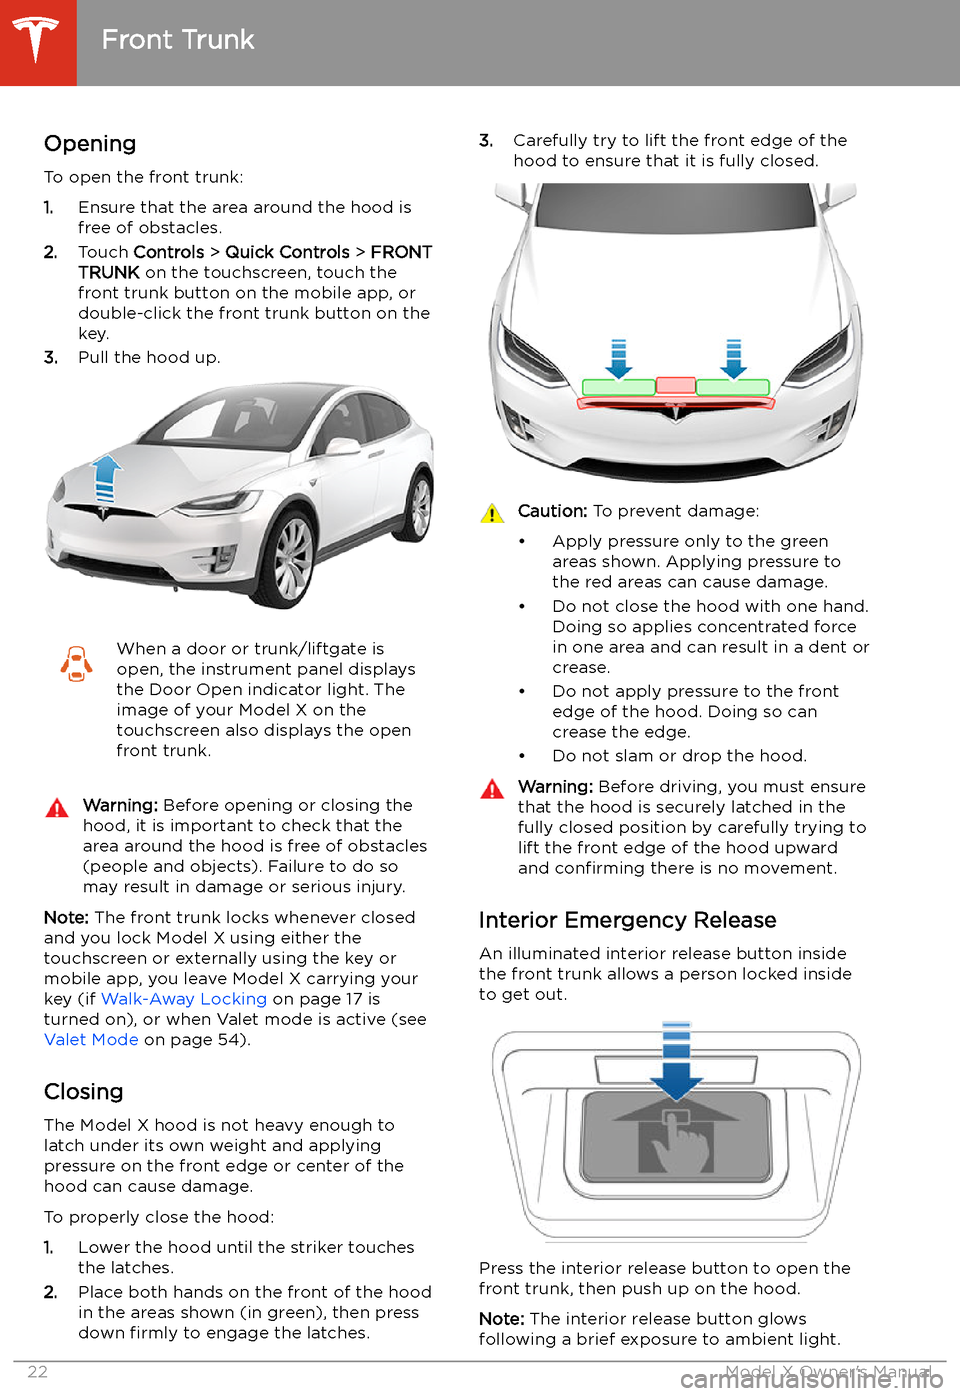 TESLA MODEL X 2020  Owners Manual Front Trunk
Opening
To open the front trunk:
1. Ensure that the area around the hood is
free of obstacles.
2. Touch  Controls  > Quick Controls  > FRONT
TRUNK  on the touchscreen, touch the
front trun